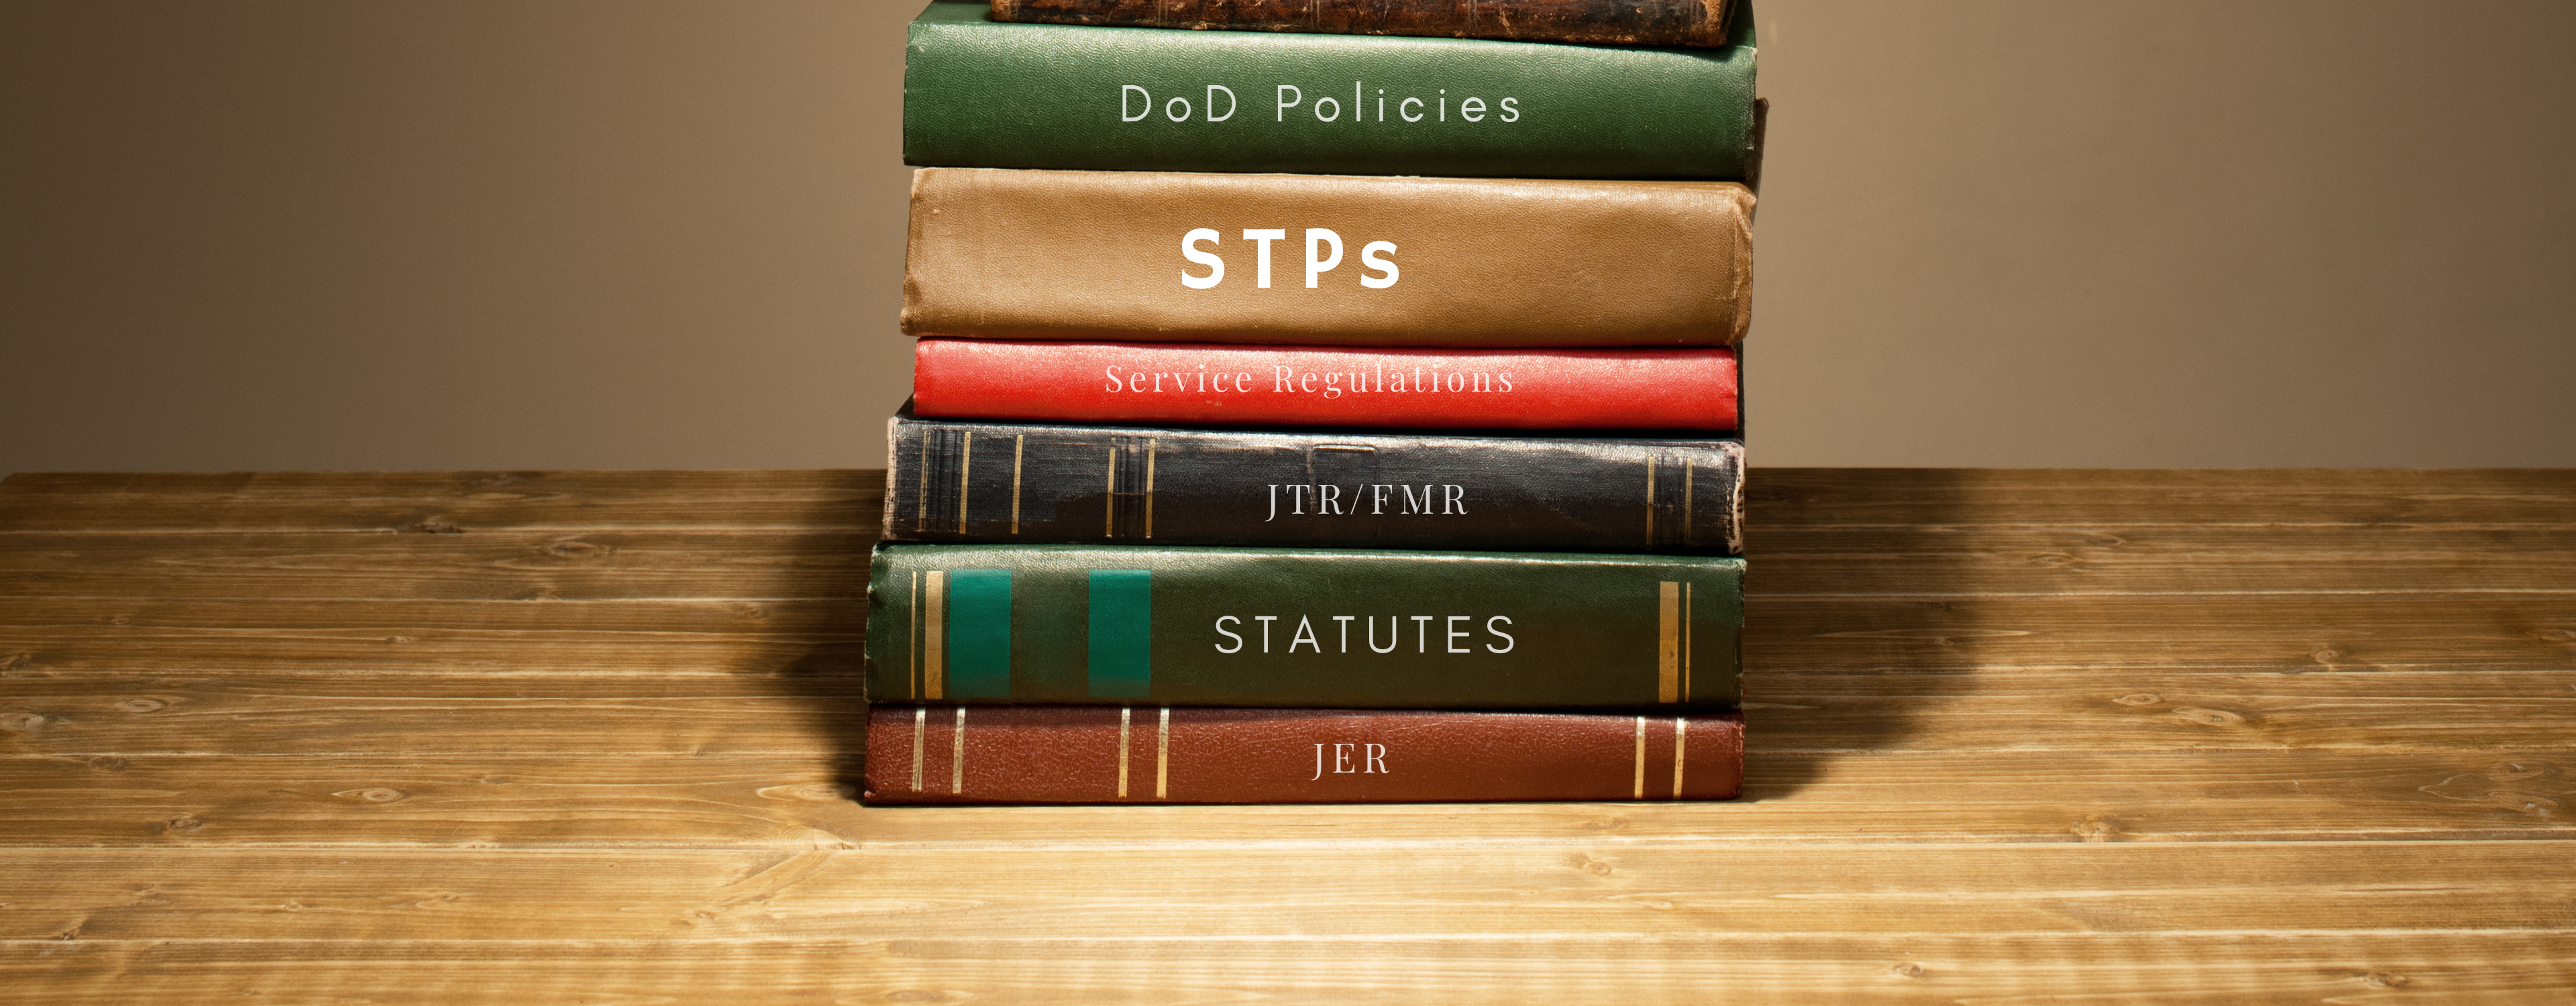 Stack of books, with 'STP's written on one of the spines